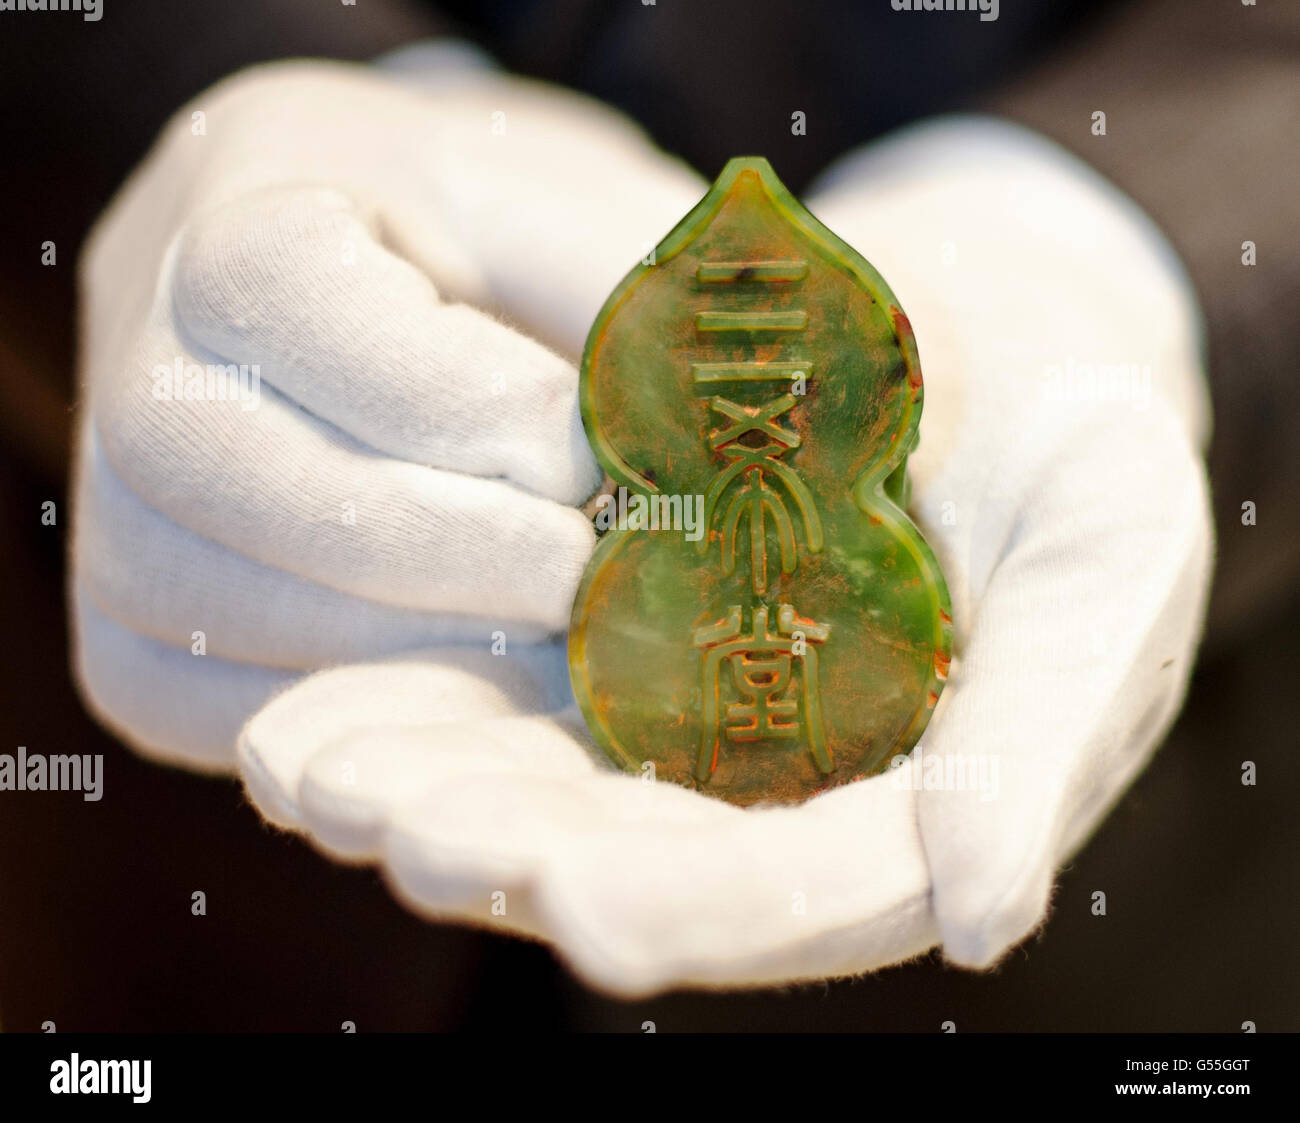 A Chinese Imperial San Xi Tang Seal, dating from the Qianlong period 1736-1795, which is expected to fetch over £1 million at auction, at Bonham's Fine Chinese Art Sale on May 17 2012. Stock Photo